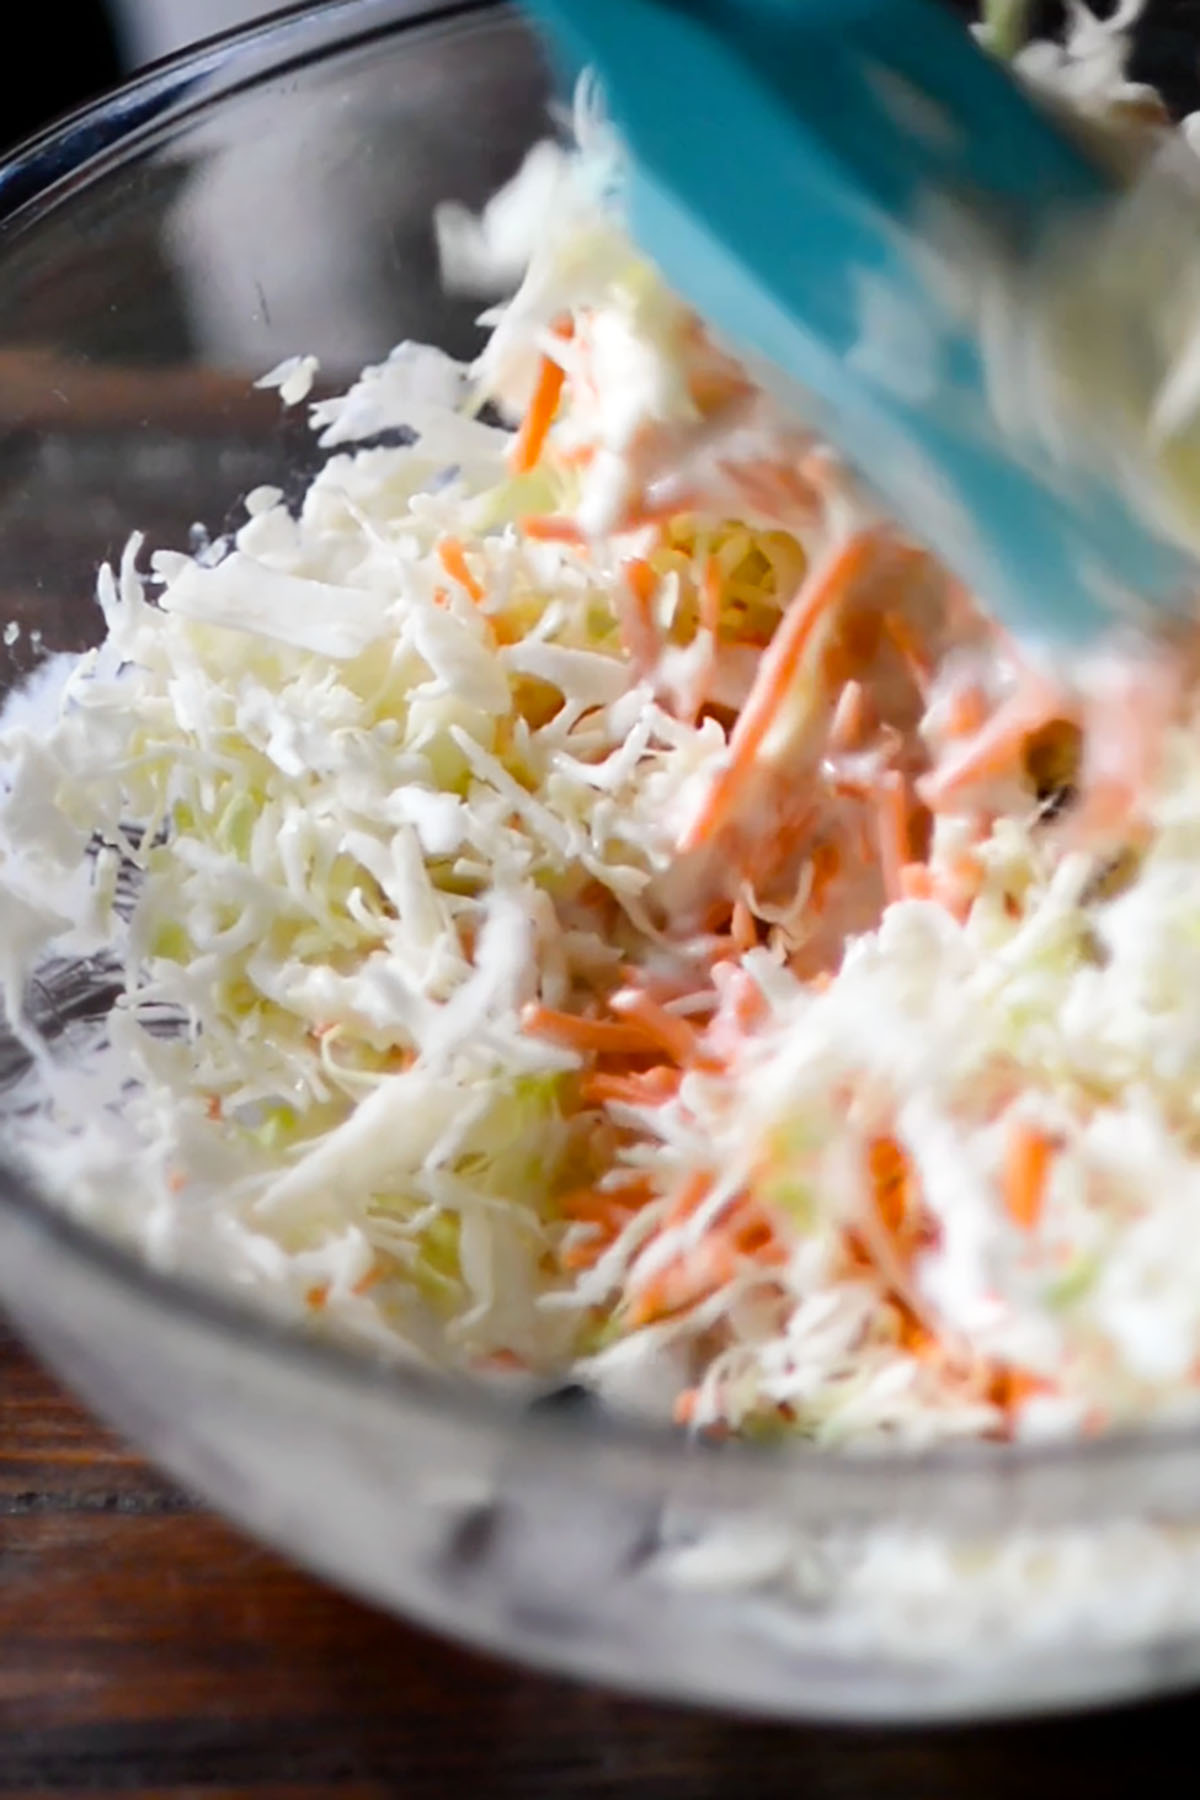 Coleslaw being tossed in a glass bowl.